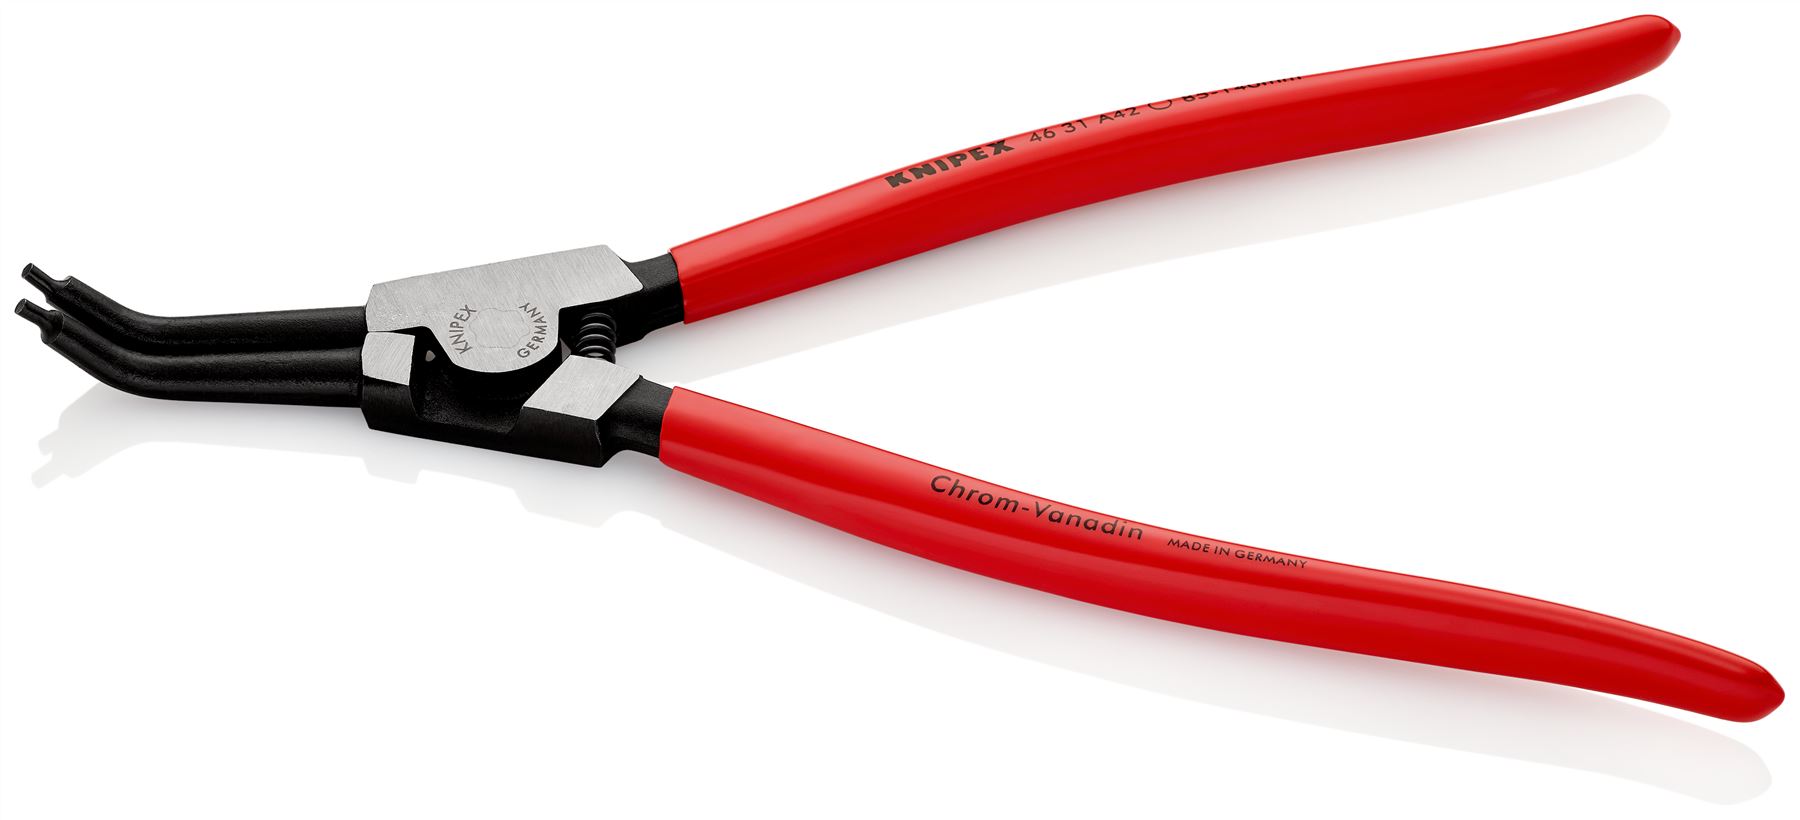 KNIPEX Circlip Pliers for External Circlips on Shafts 45° Angled 310mm 3.2mm Diameter Tips 46 31 A42